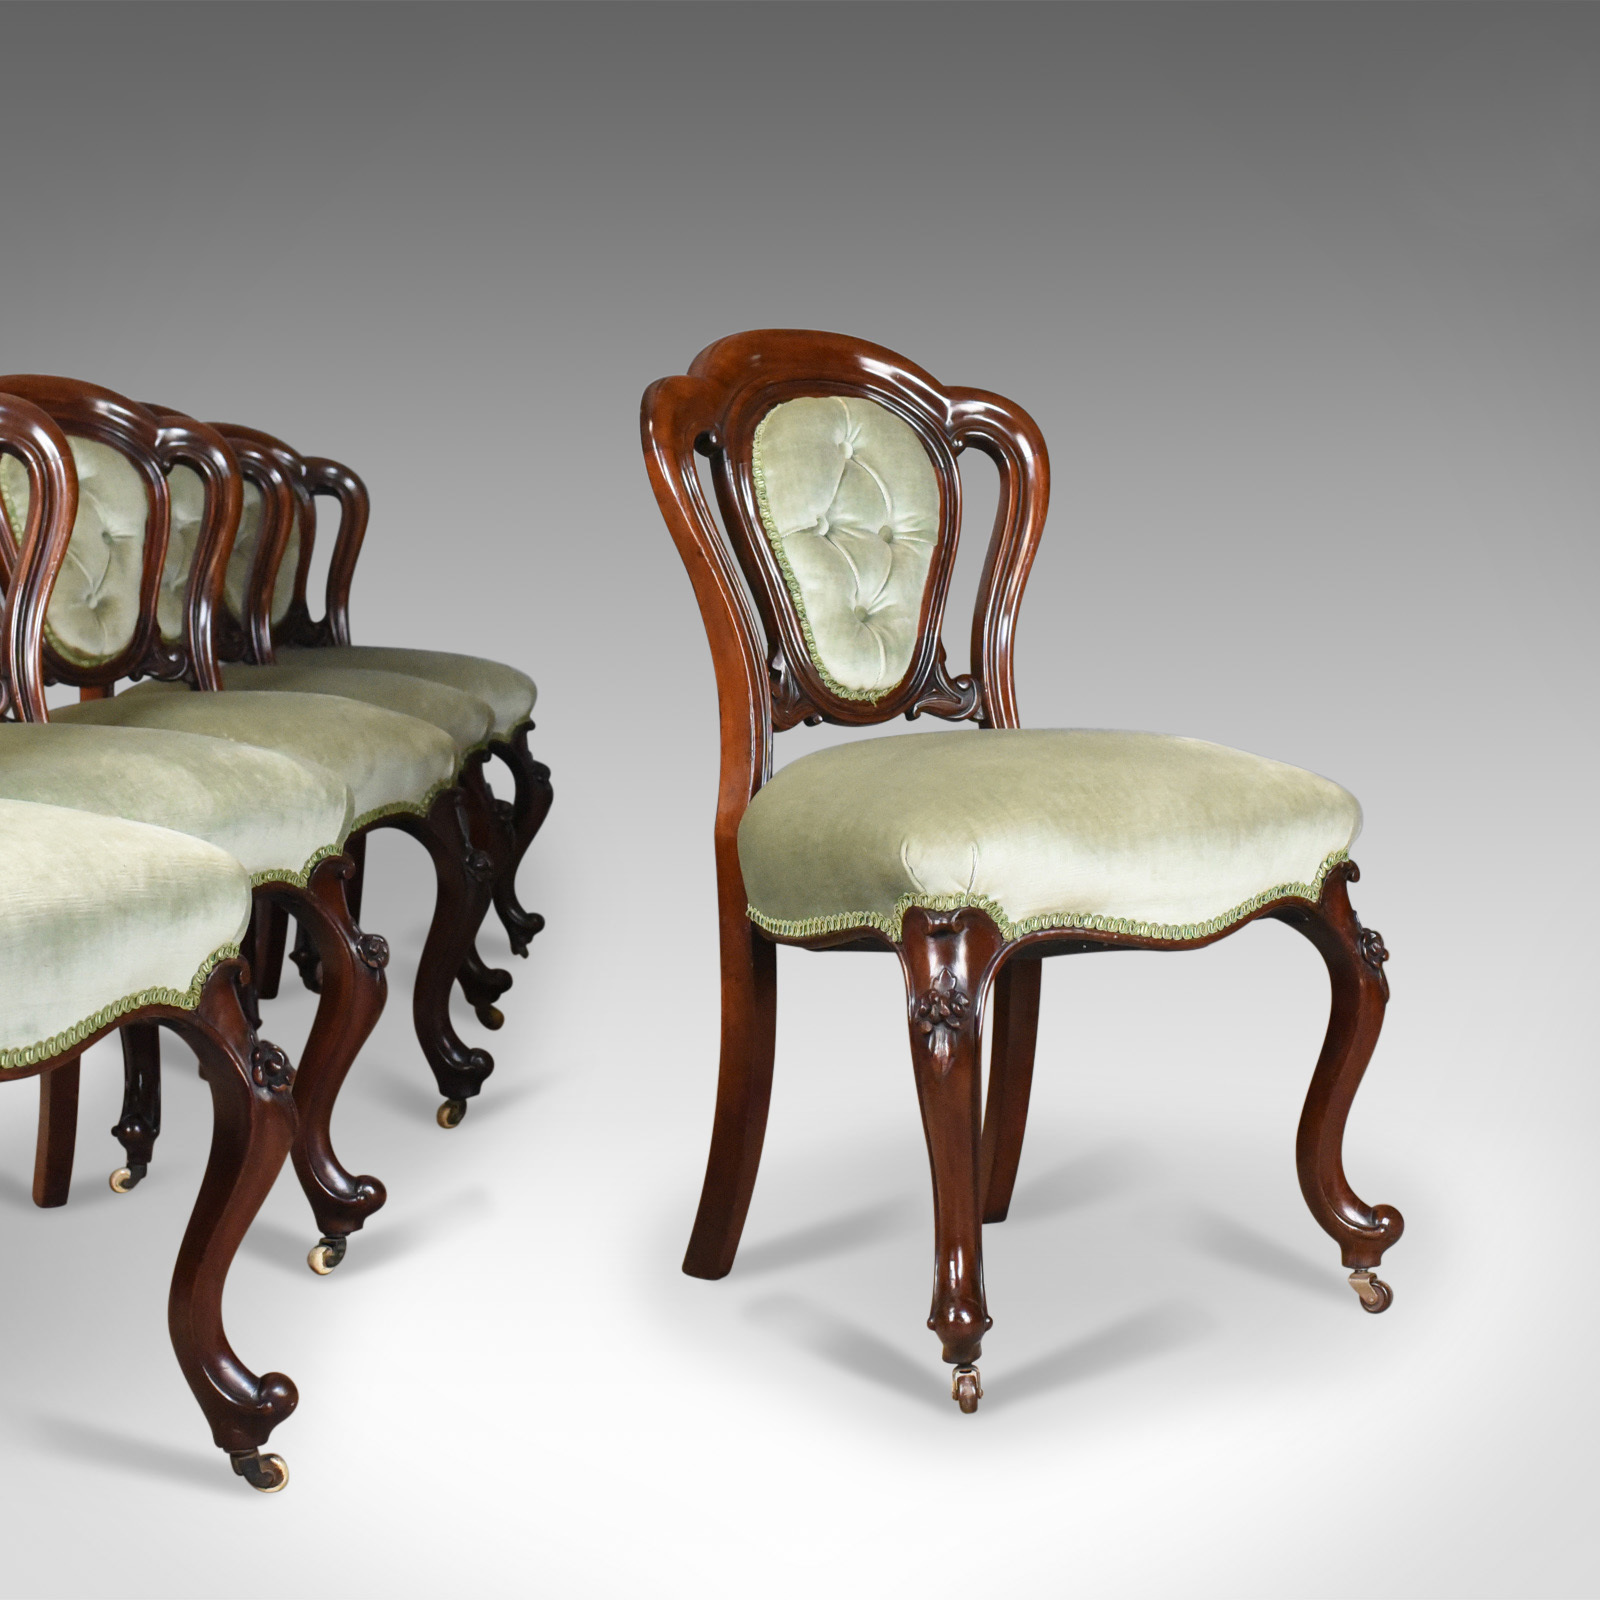 Antique Regency Chairs